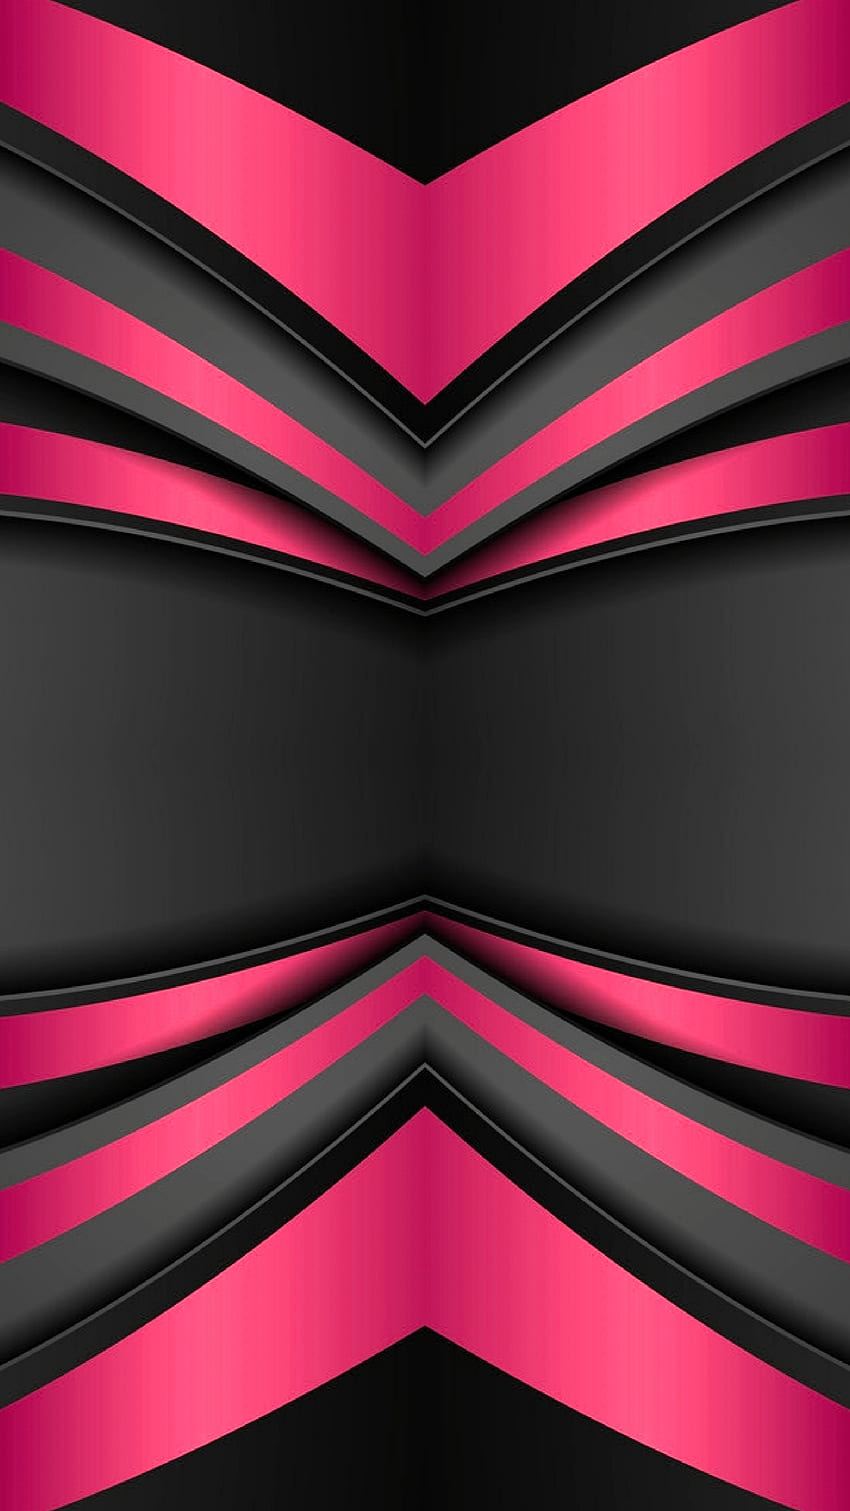 ;lhgdfs, pink, shadow, pattern, 3d, amoled, modern, design, layers, gamer, graphic, hot pink, digital, tech, waves, new, neon, texture, cool, black, abstract, curves, material, corporate, future HD phone wallpaper